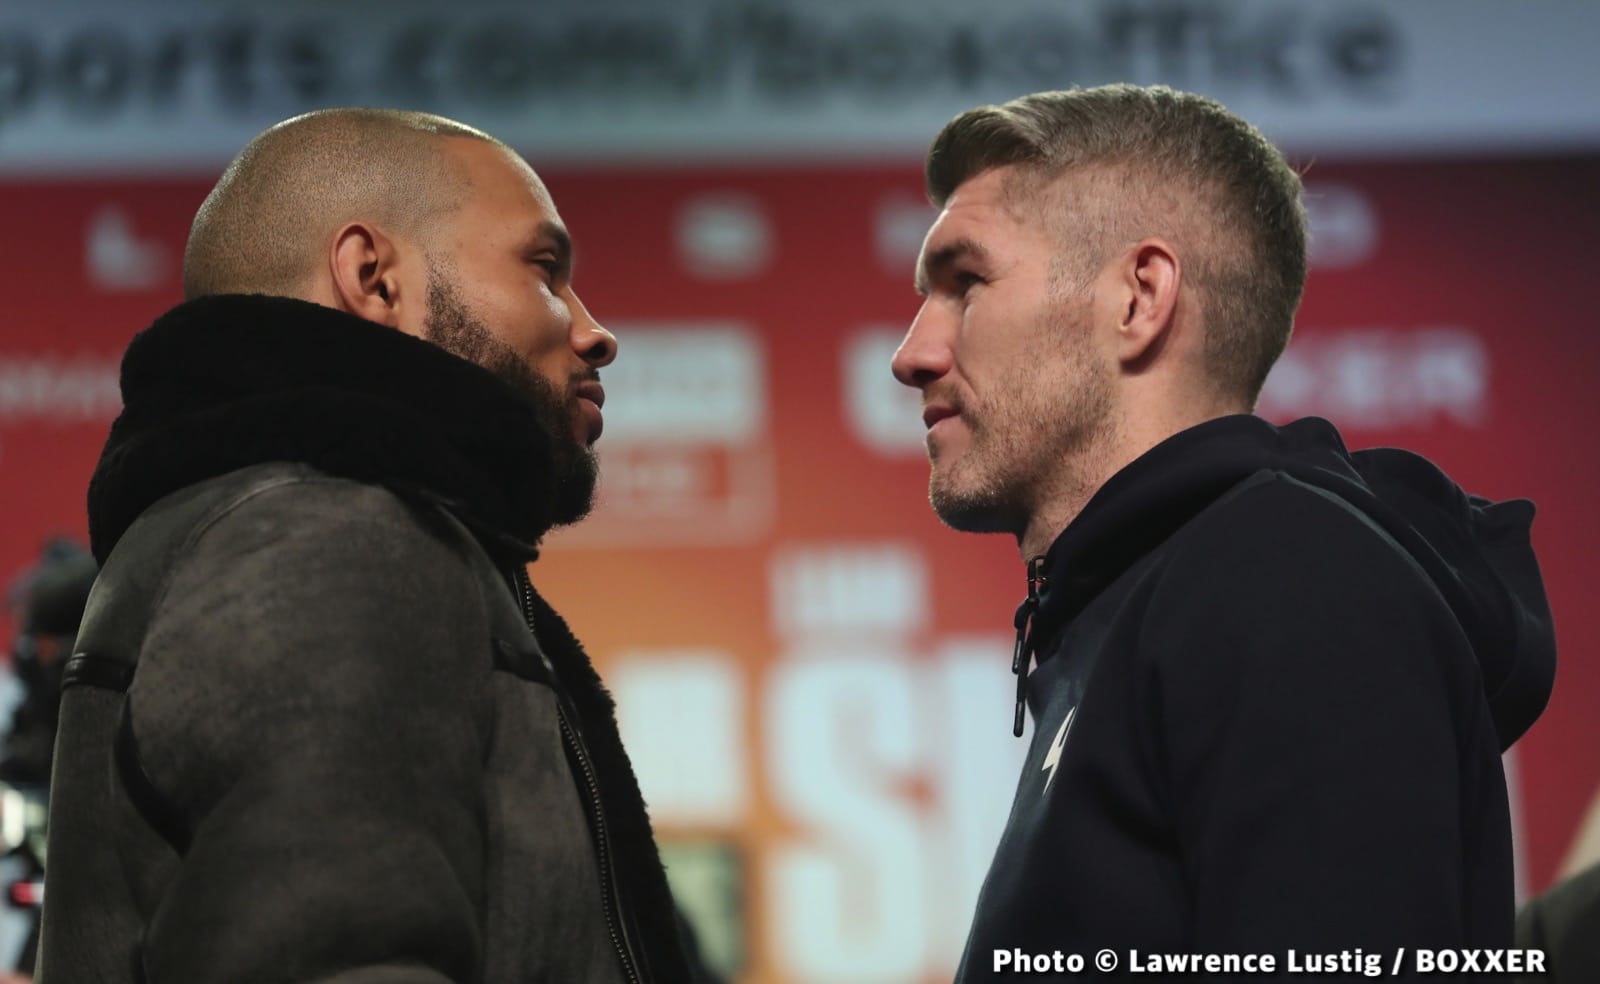 Image: Chris Eubank Jr reacts to homophobic remarks from Liam Smith